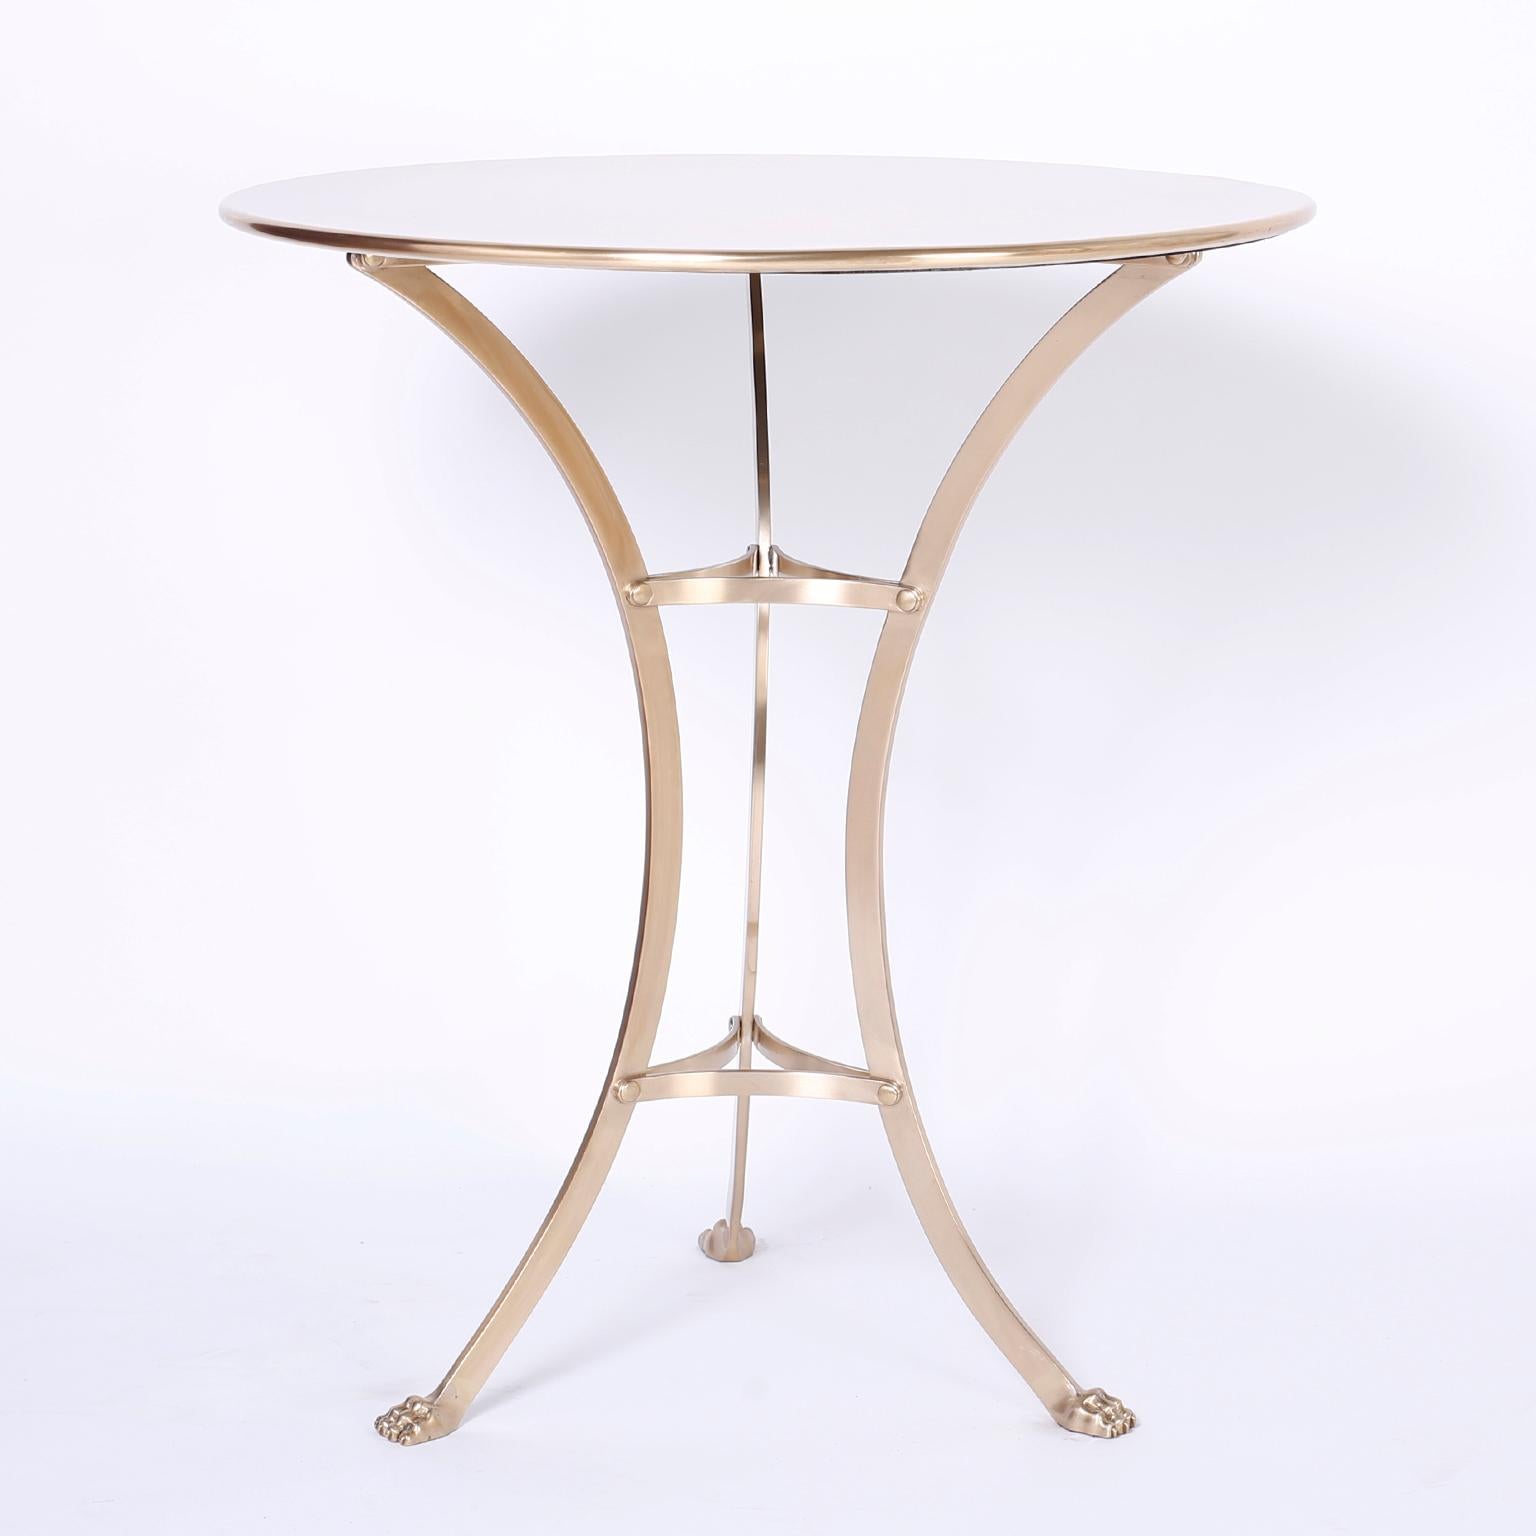 Chic pair of neoclassic tables or gueridons with simple round tops over three saber legs with cat claw feet. Hand polished and lacquered for easy care.